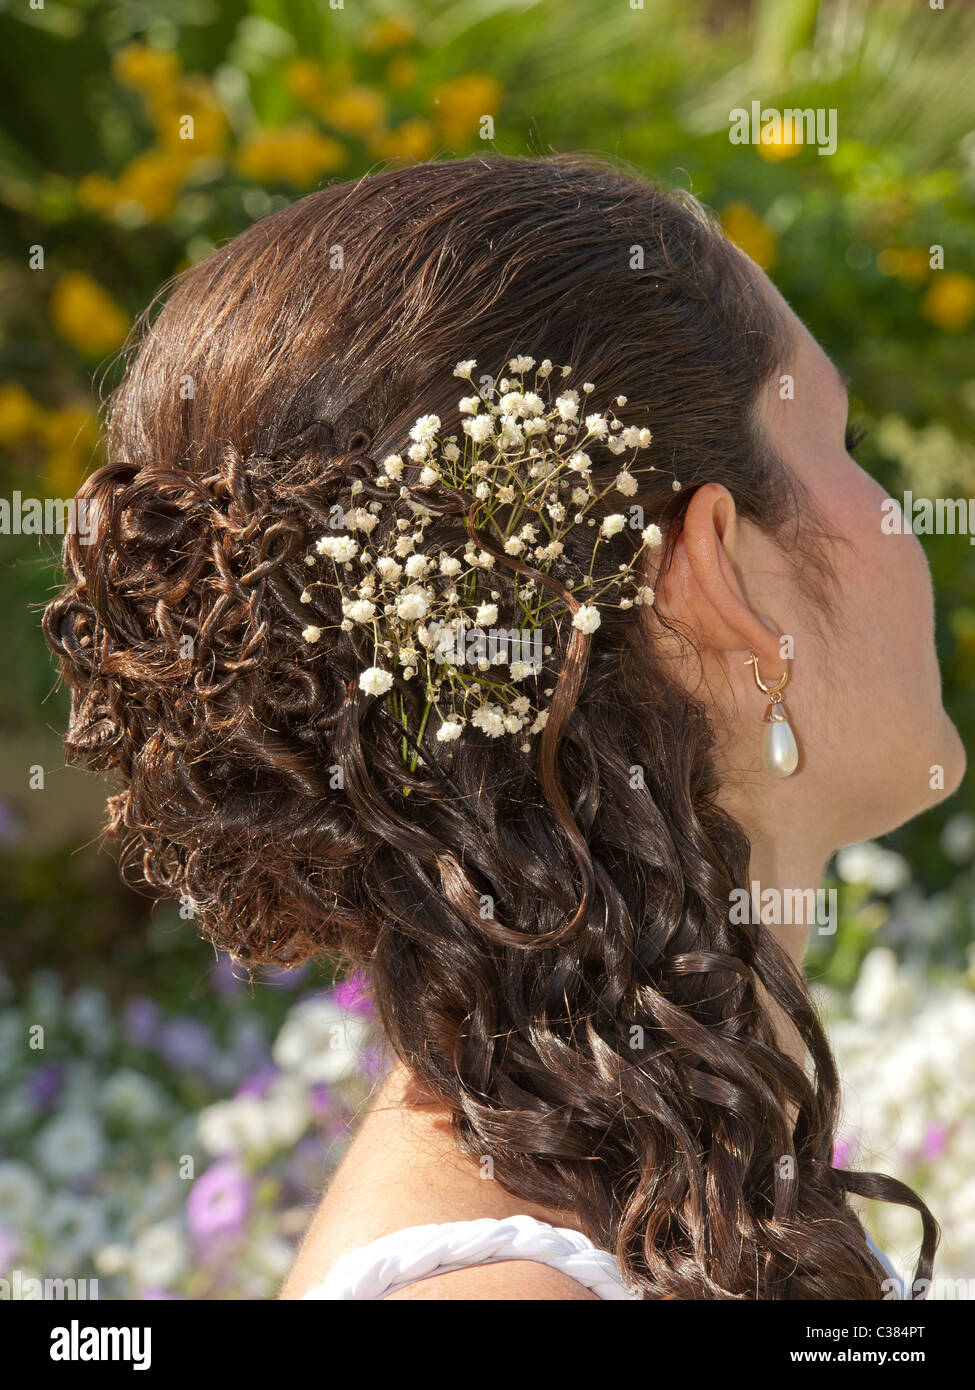 Ornate hair style with decoration on the head of a bride Stock Photo - Alamy